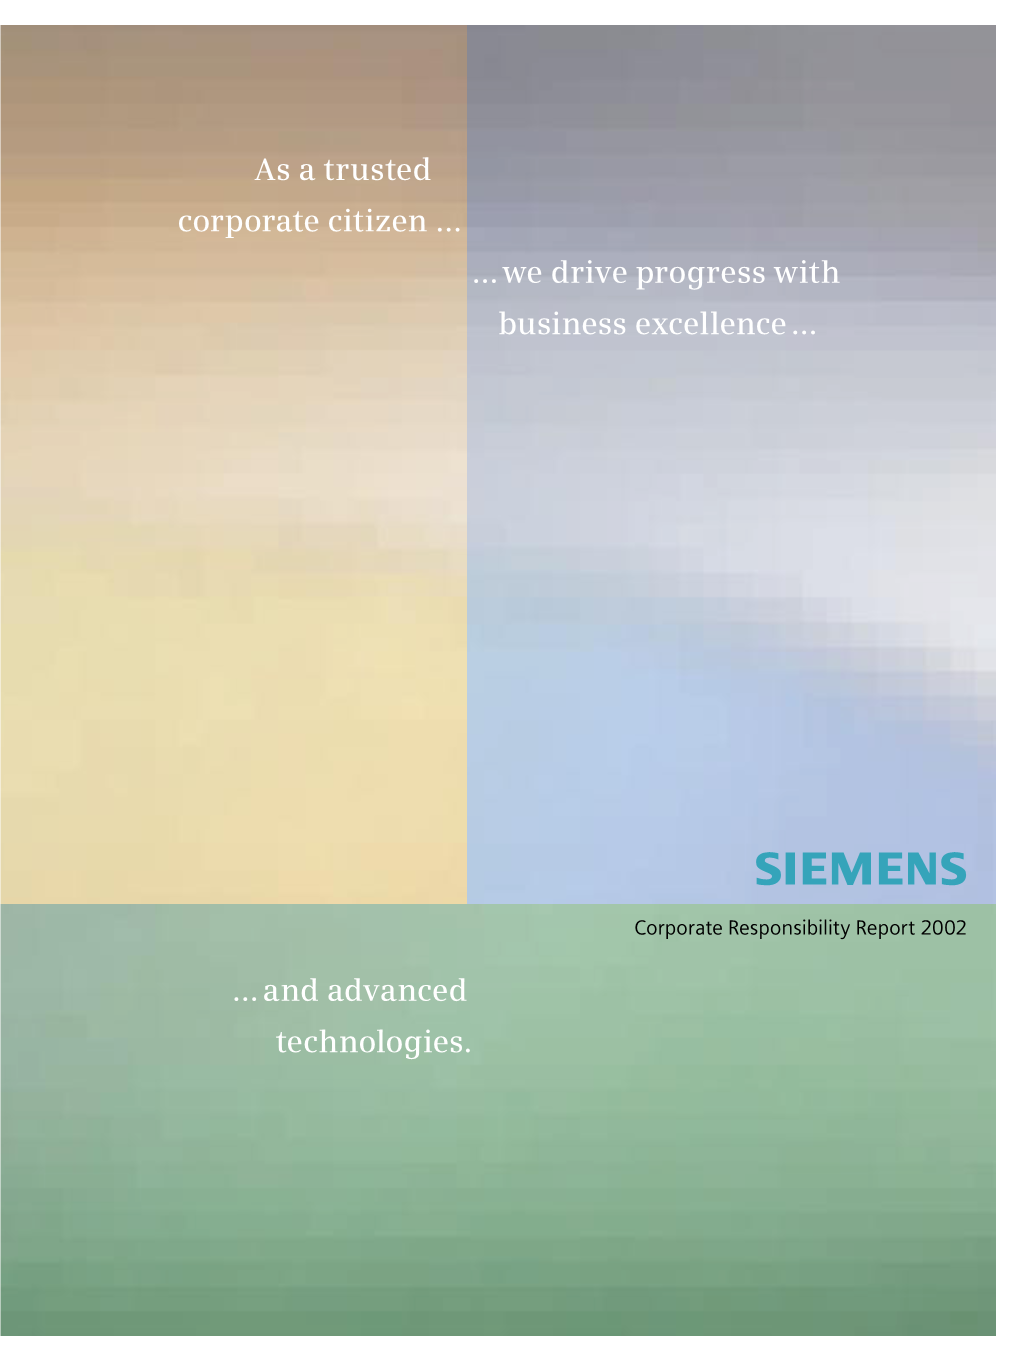 As a Trusted Corporate Citizen We Drive Progress with Business Excellence